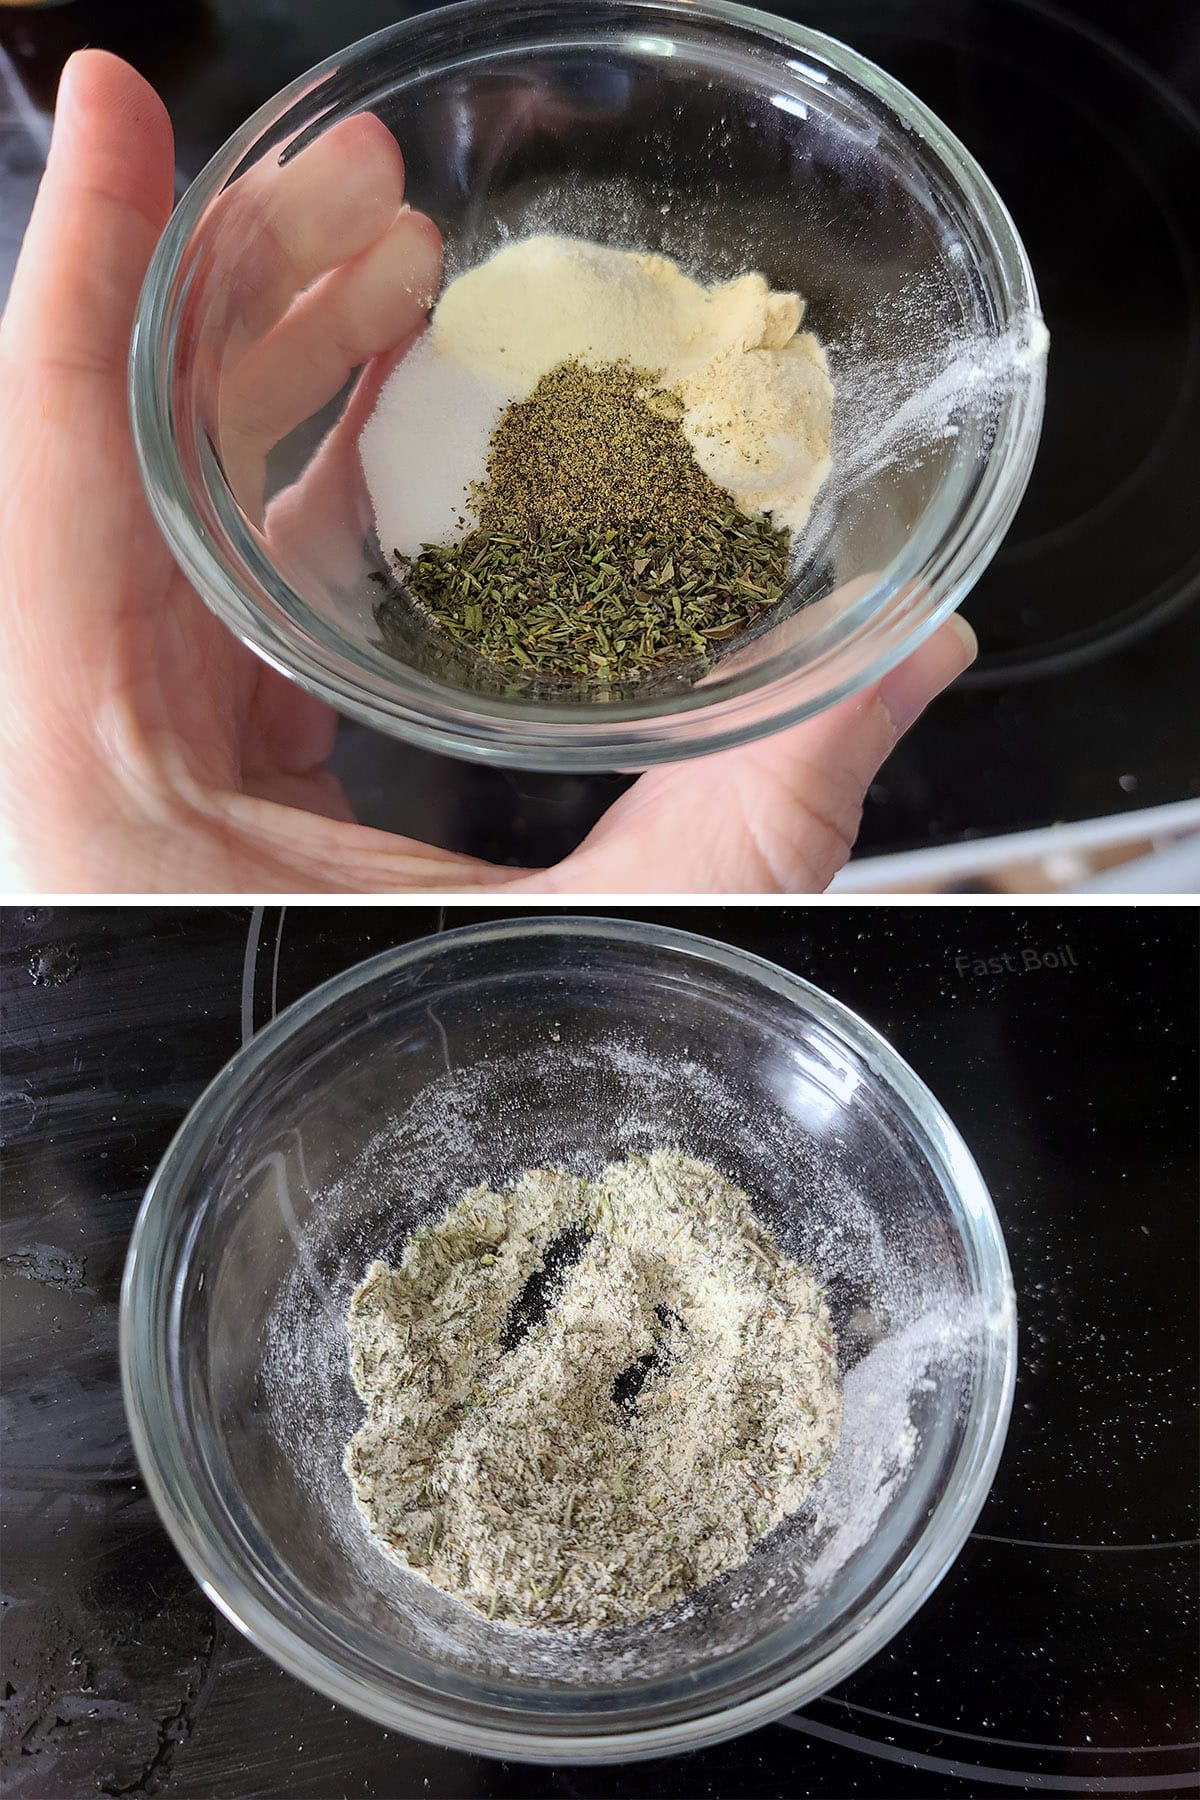 A 2 part image showing the seasonings being mixed together.